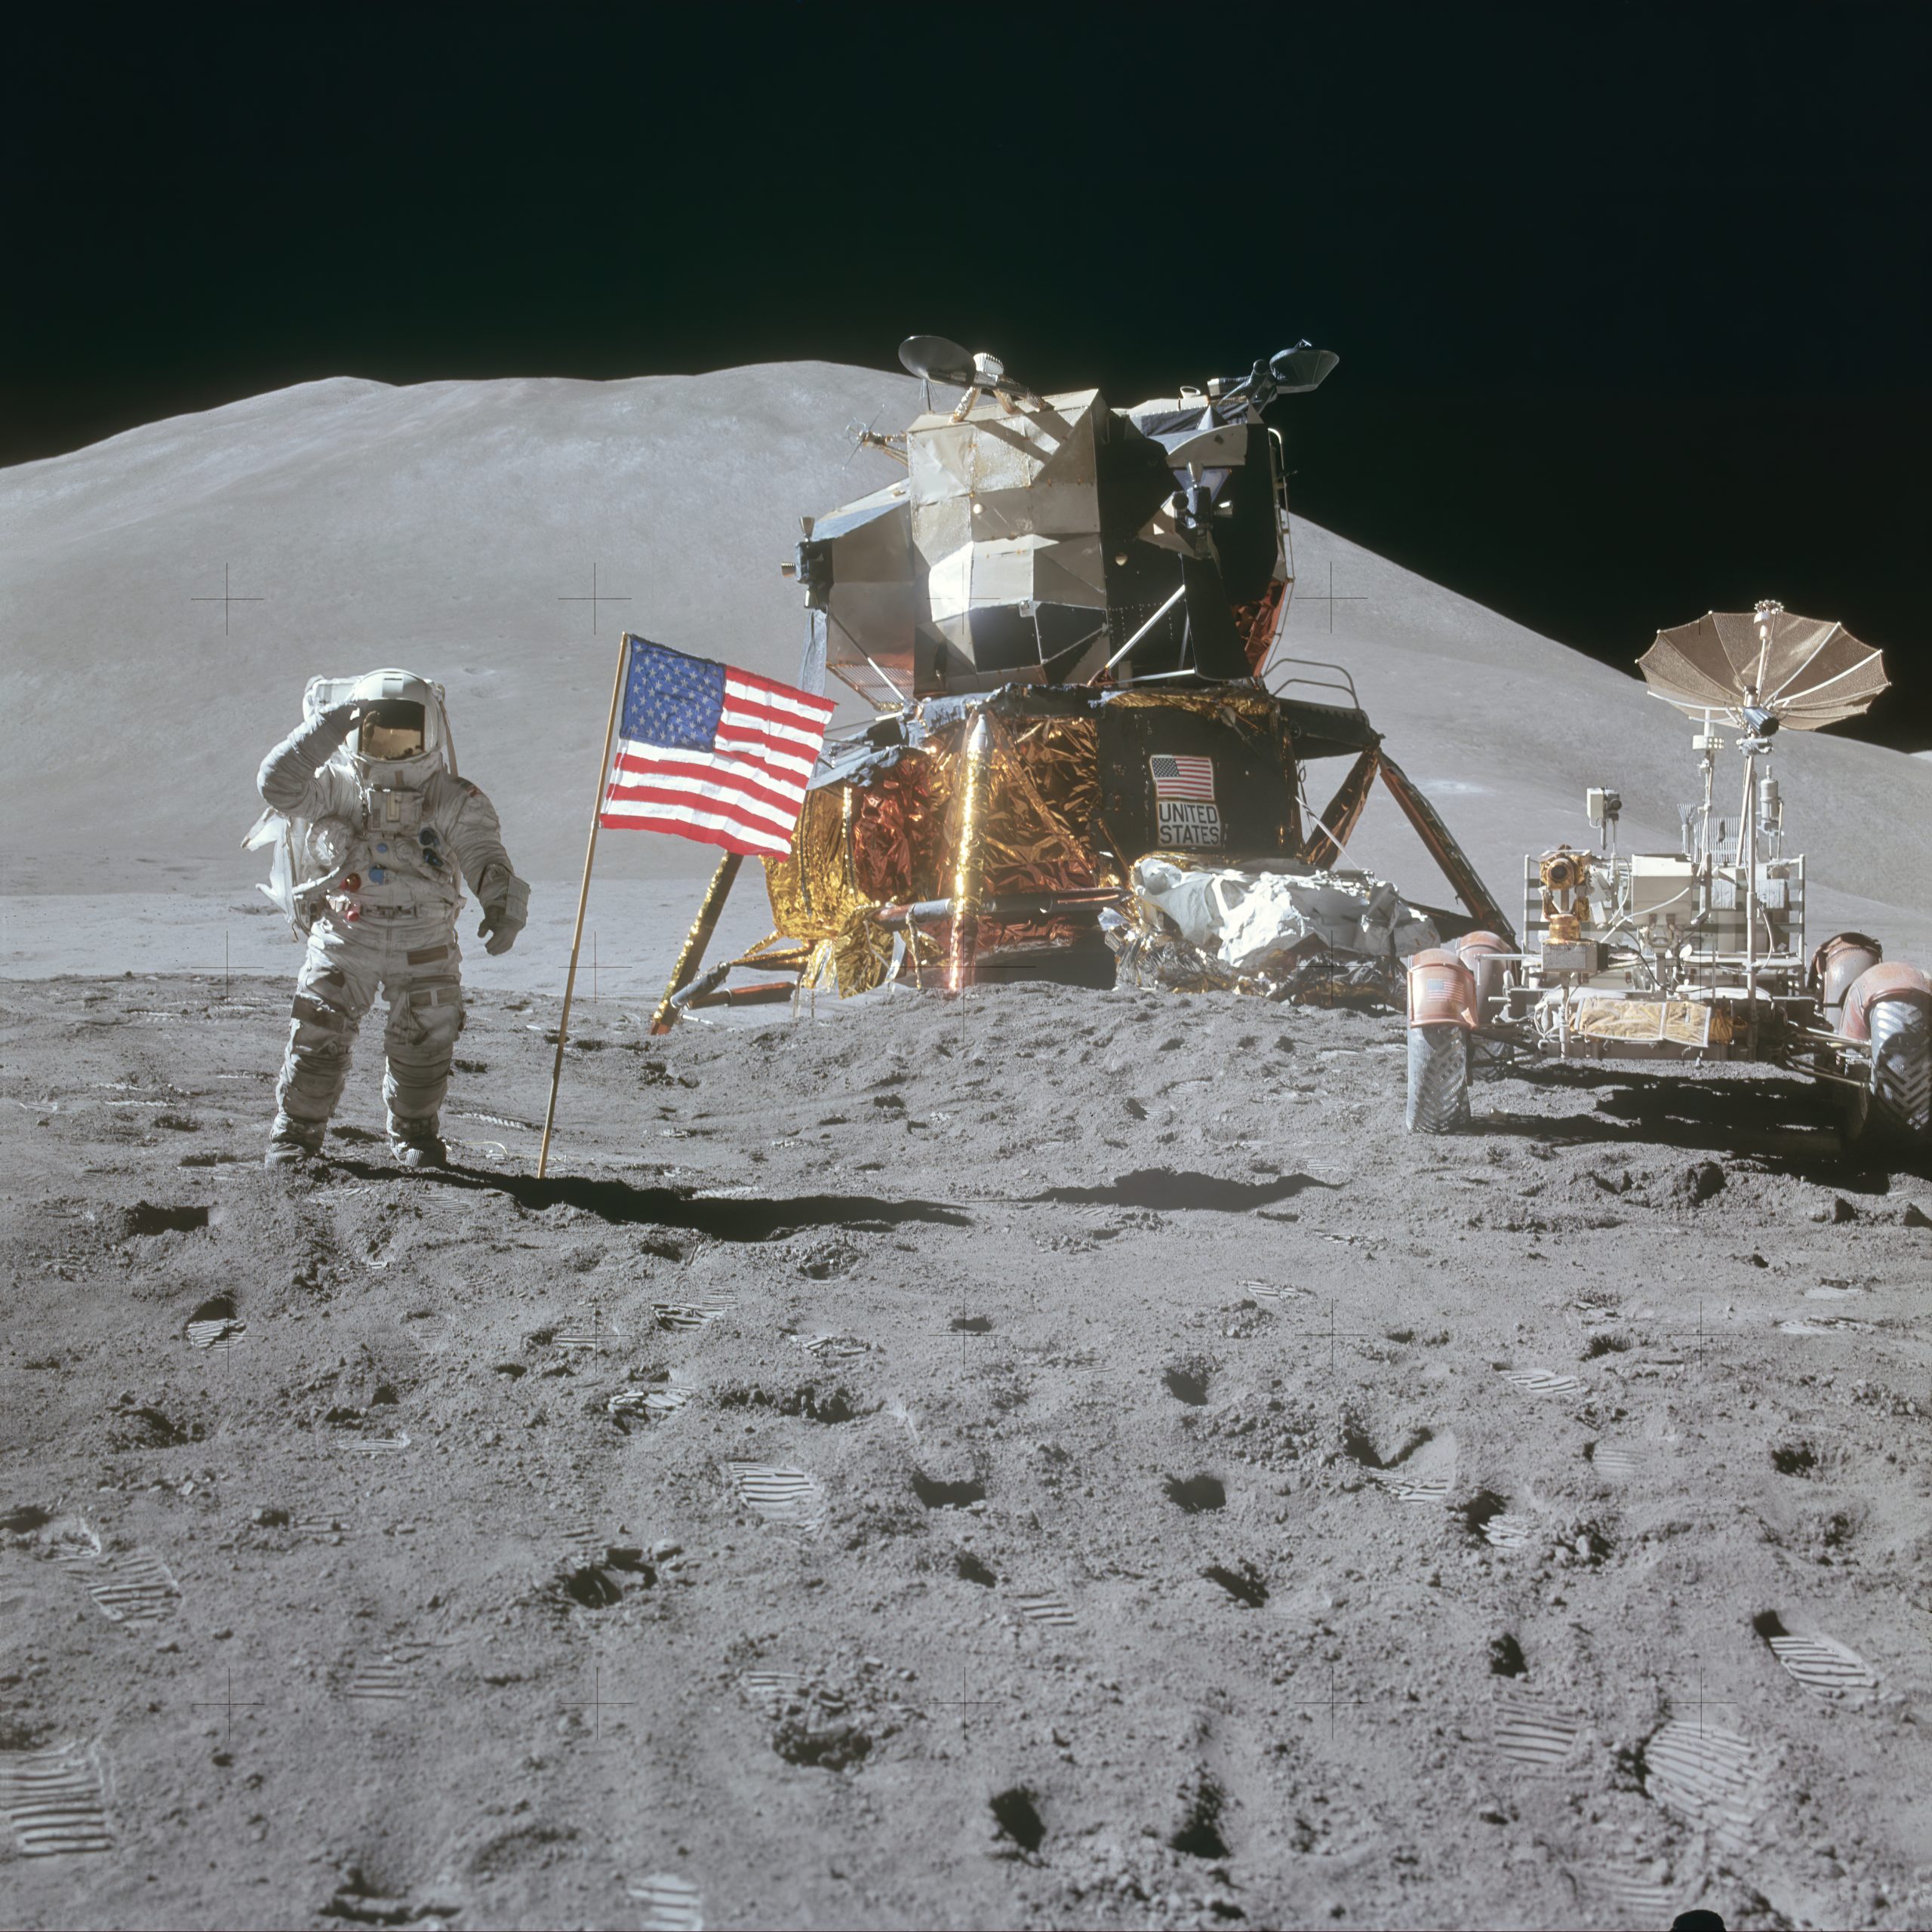 Photograph of Astronauts on the Moon. At center is the landing module, and to the right is the Lunar rover used by the Astronauts to travel large distances from the landing site. At left an Astronaut salutes the American flag placed near the lander. Scattered throughout the foreground are footprints in the Lunar soil.